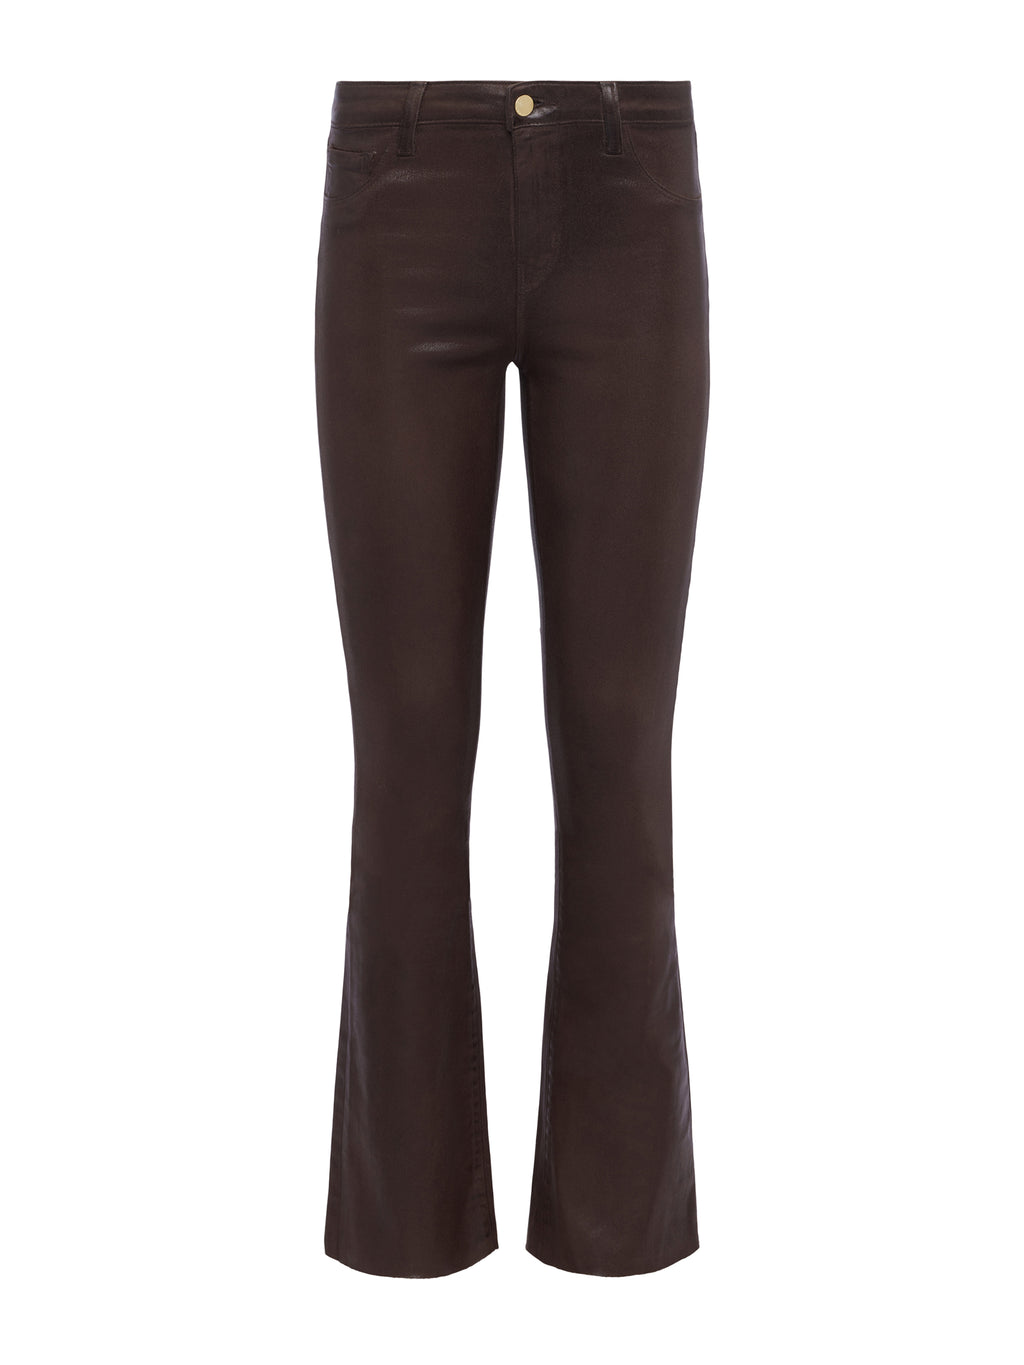 L'AGENCE Ruth Coated Straight-Leg Jean in Espresso Coated